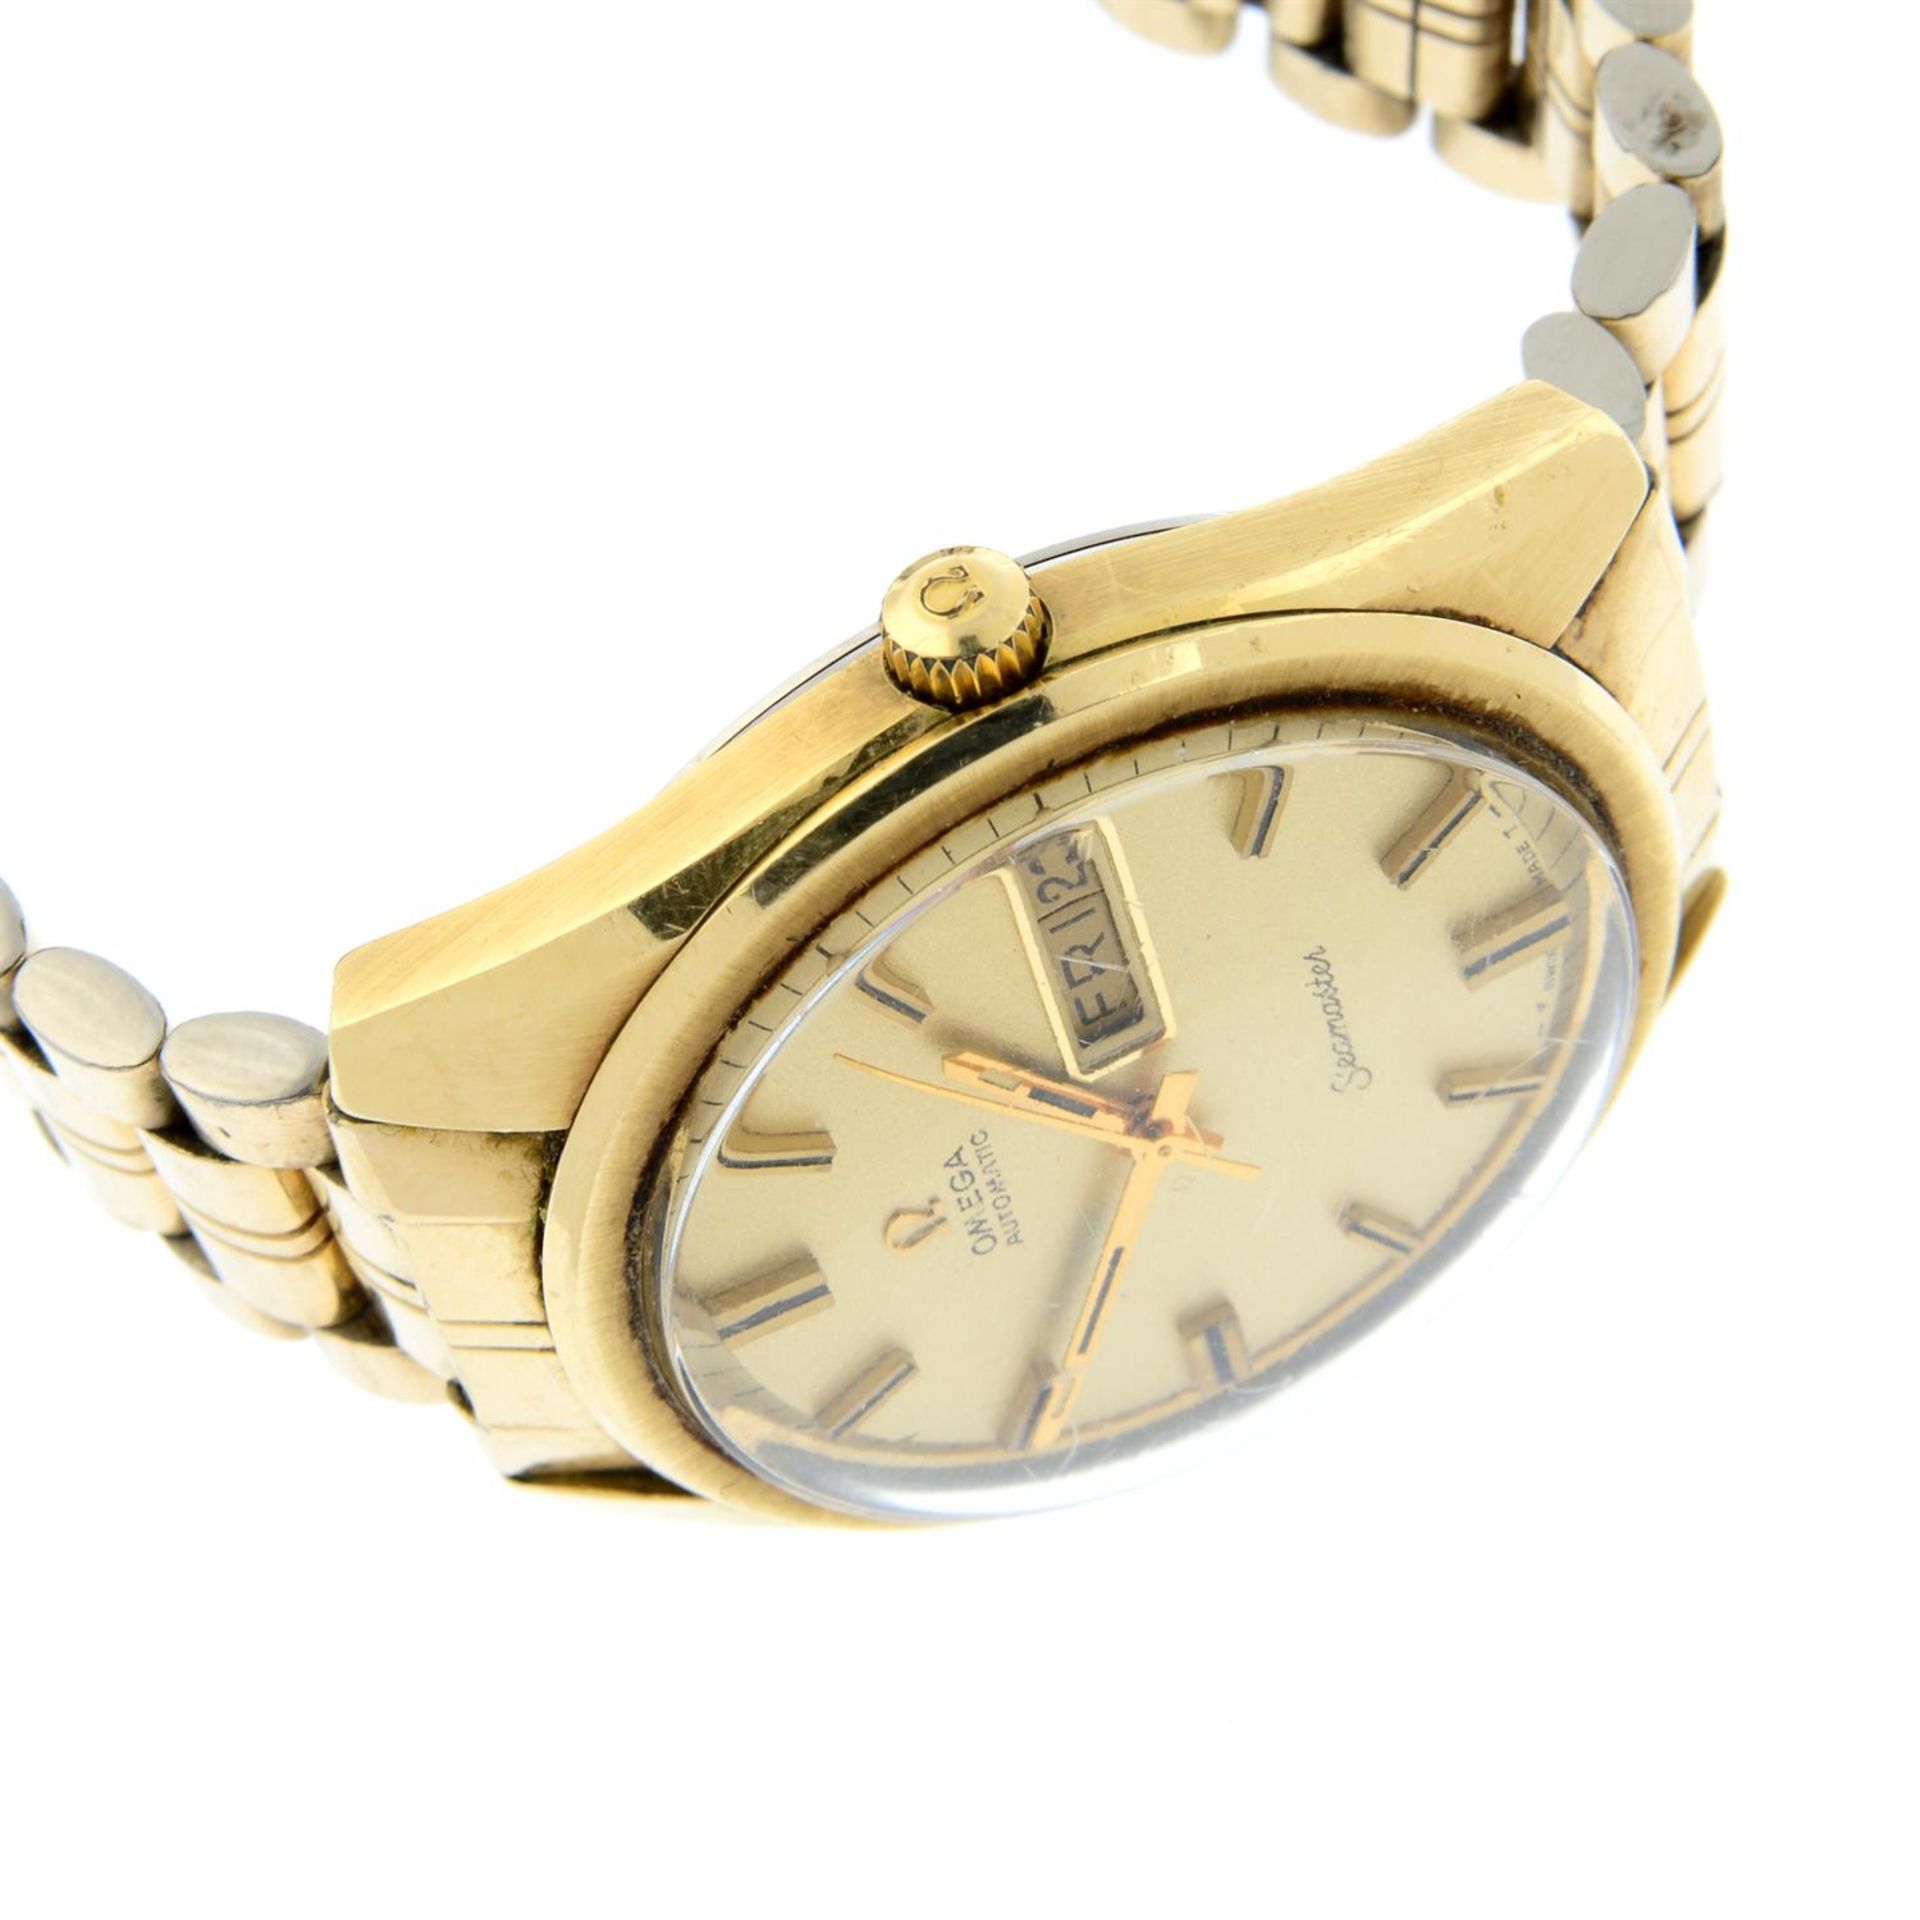 OMEGA - a gold plated Seamaster bracelet watch, 36mm. - Image 3 of 5